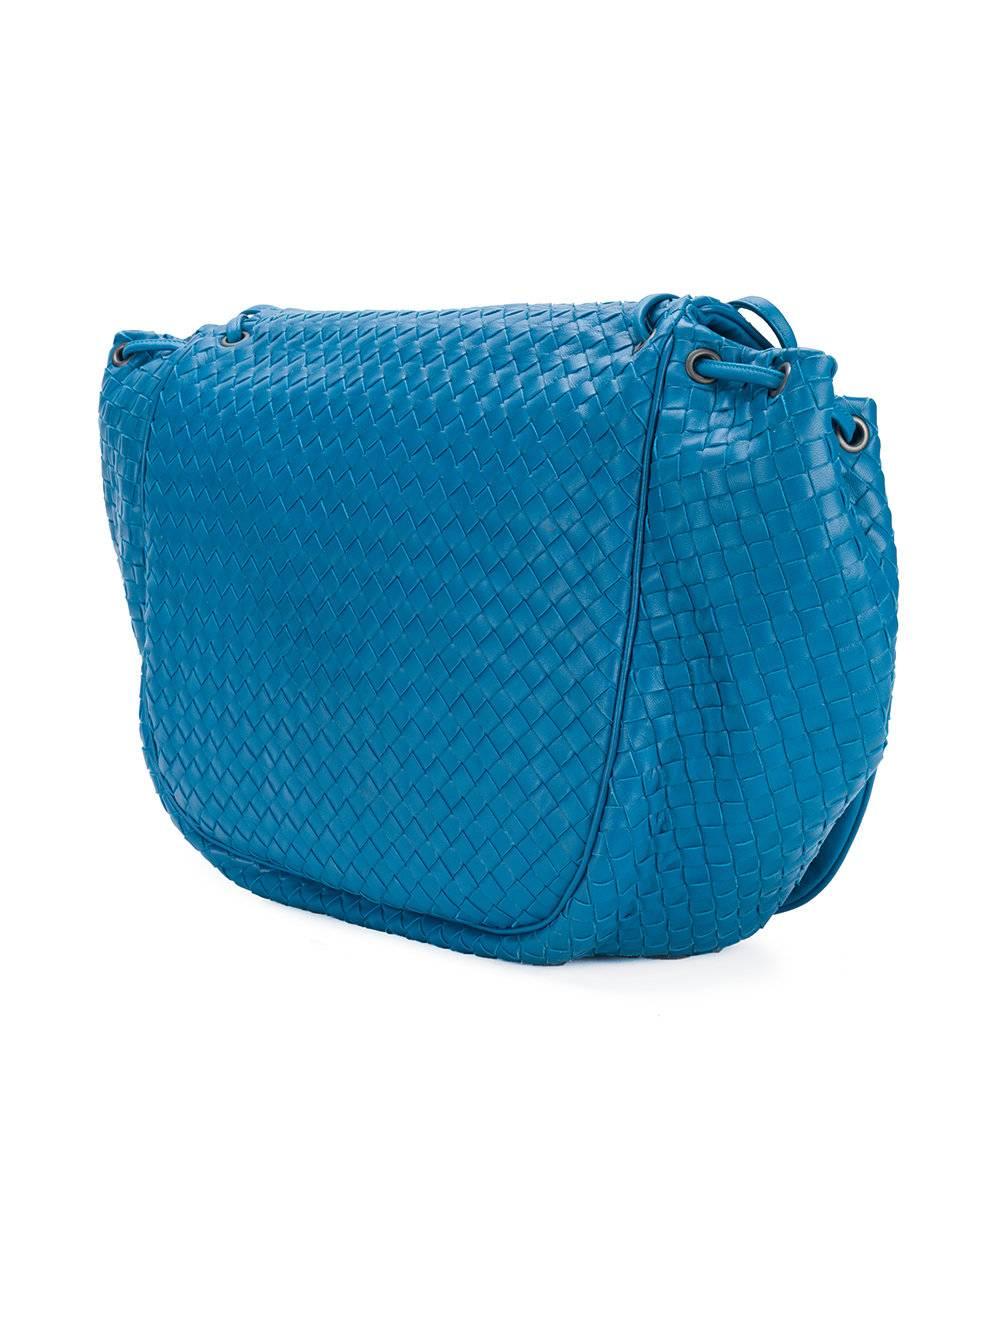 This peacock blue Nappa leather braided flap shoulder bag from Bottega Veneta features an adjustable shoulder strap, a foldover top with magnetic closure, a main internal compartment, an internal zipped pocket, an embossed internal logo stamp, a